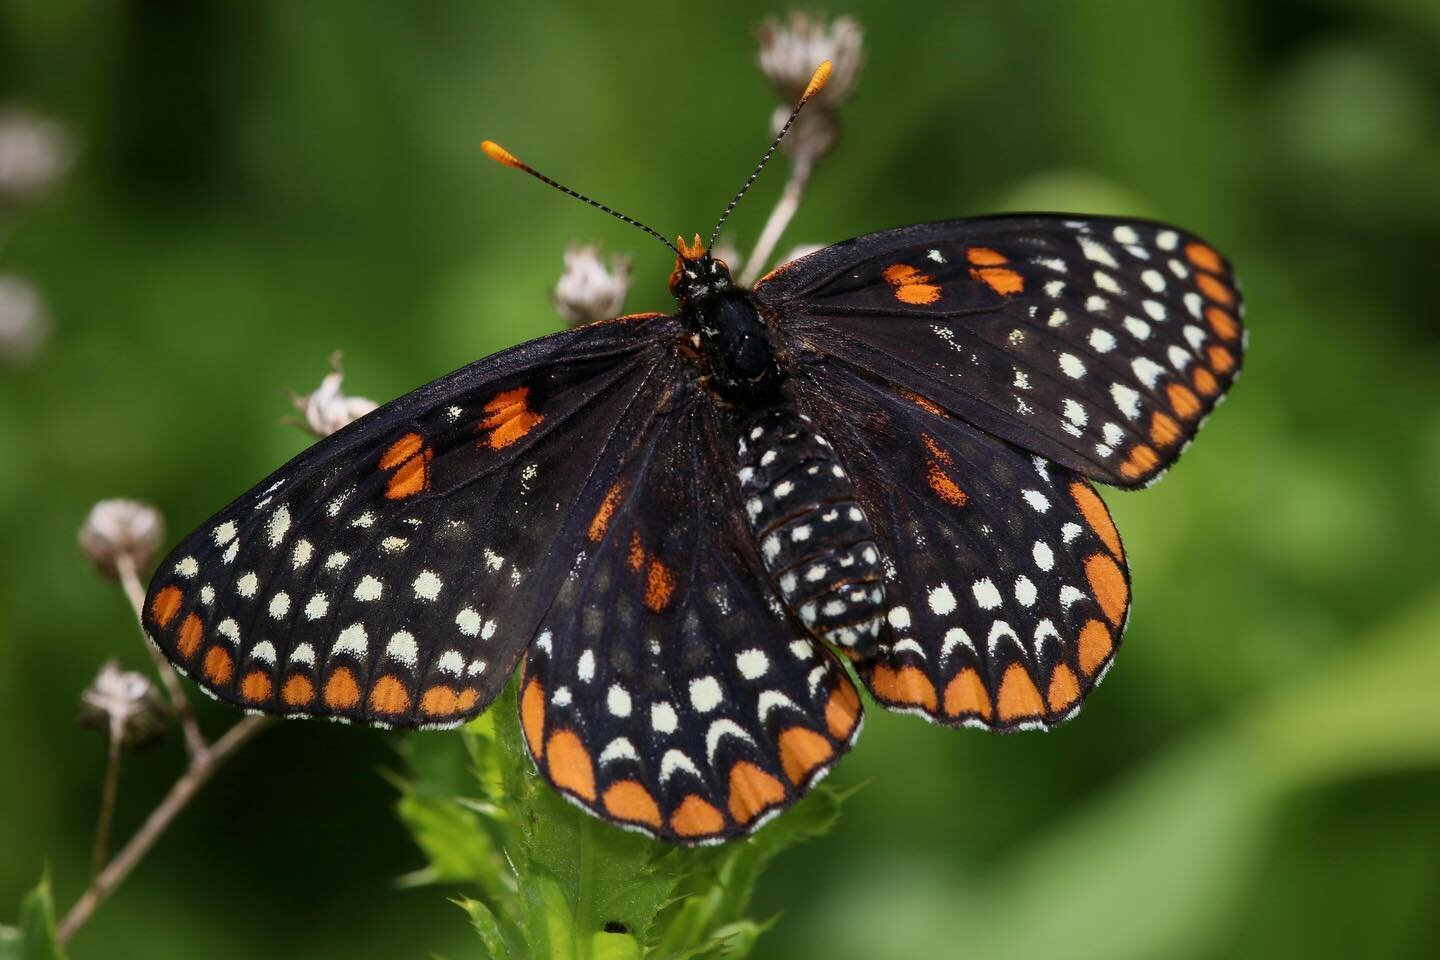 Meet the Baltimore Checkerspot (Euphydryas phaeton) &mdash; such a cool butterfly!

This species is thriving at a few field sites we&rsquo;re surveying for the Michigan Butterfly Network. We&rsquo;ve seen 60-100 individuals this week! Unfortunately, 